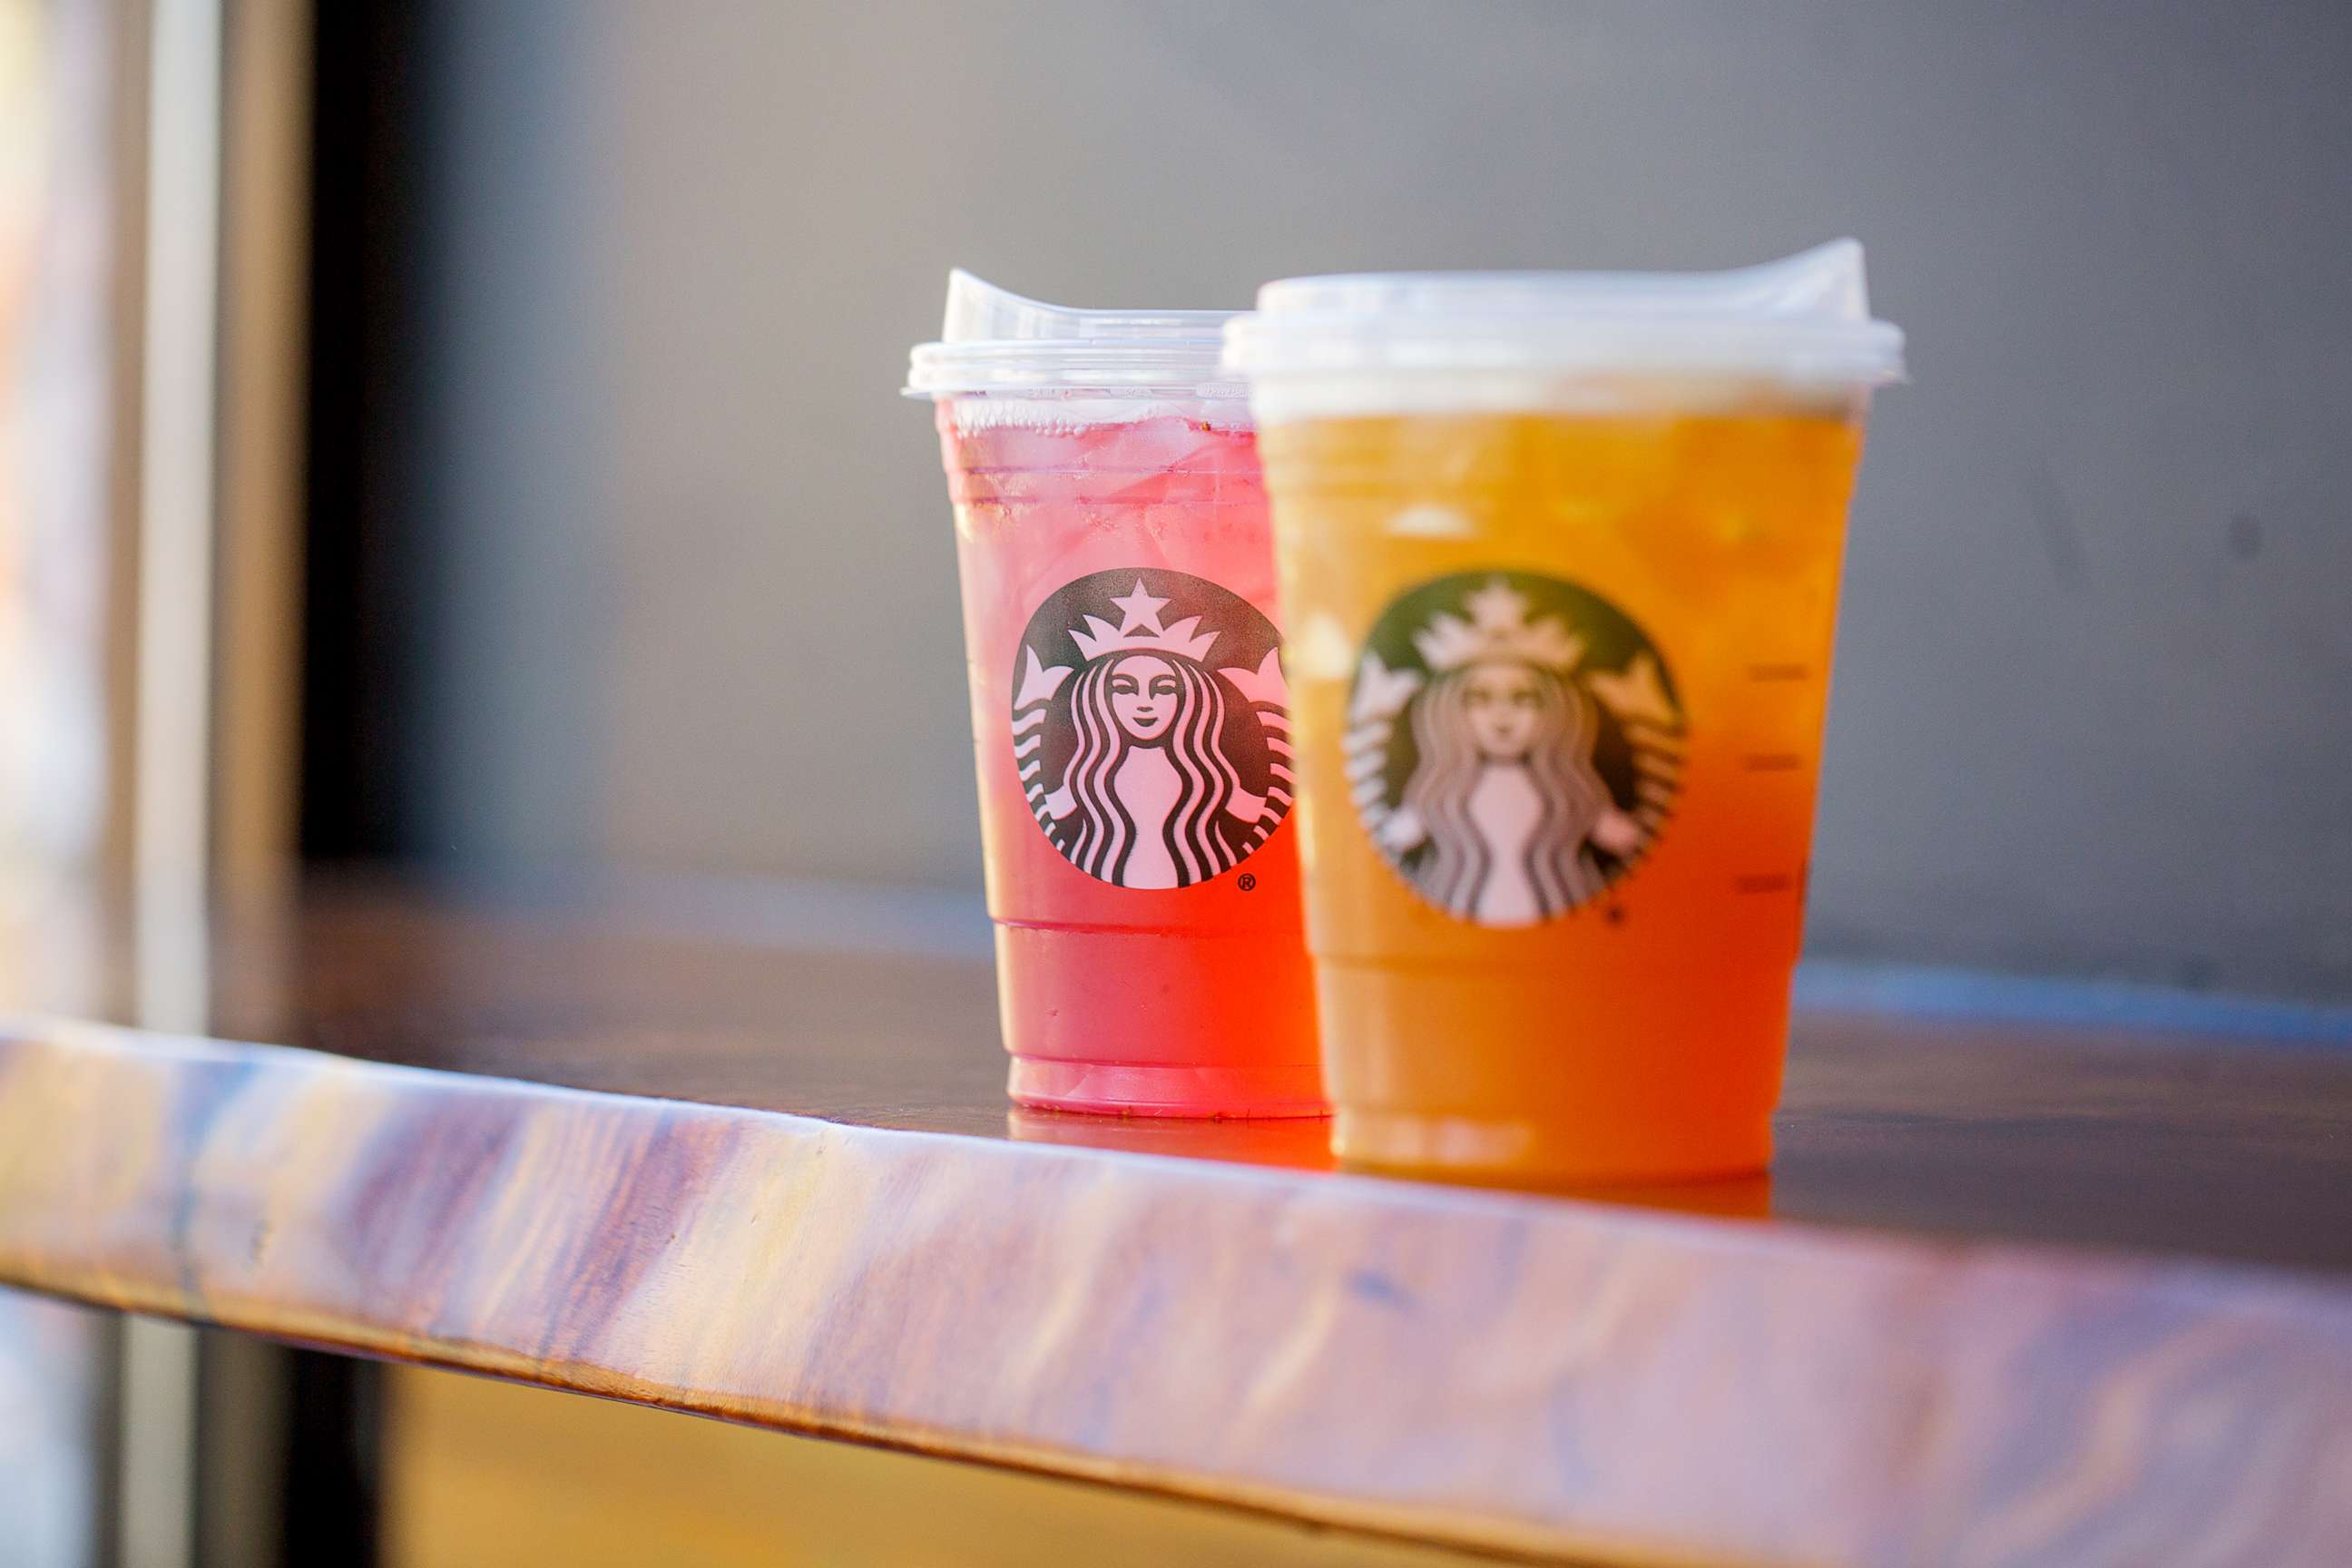 Starbucks is phasing out its single-use cups